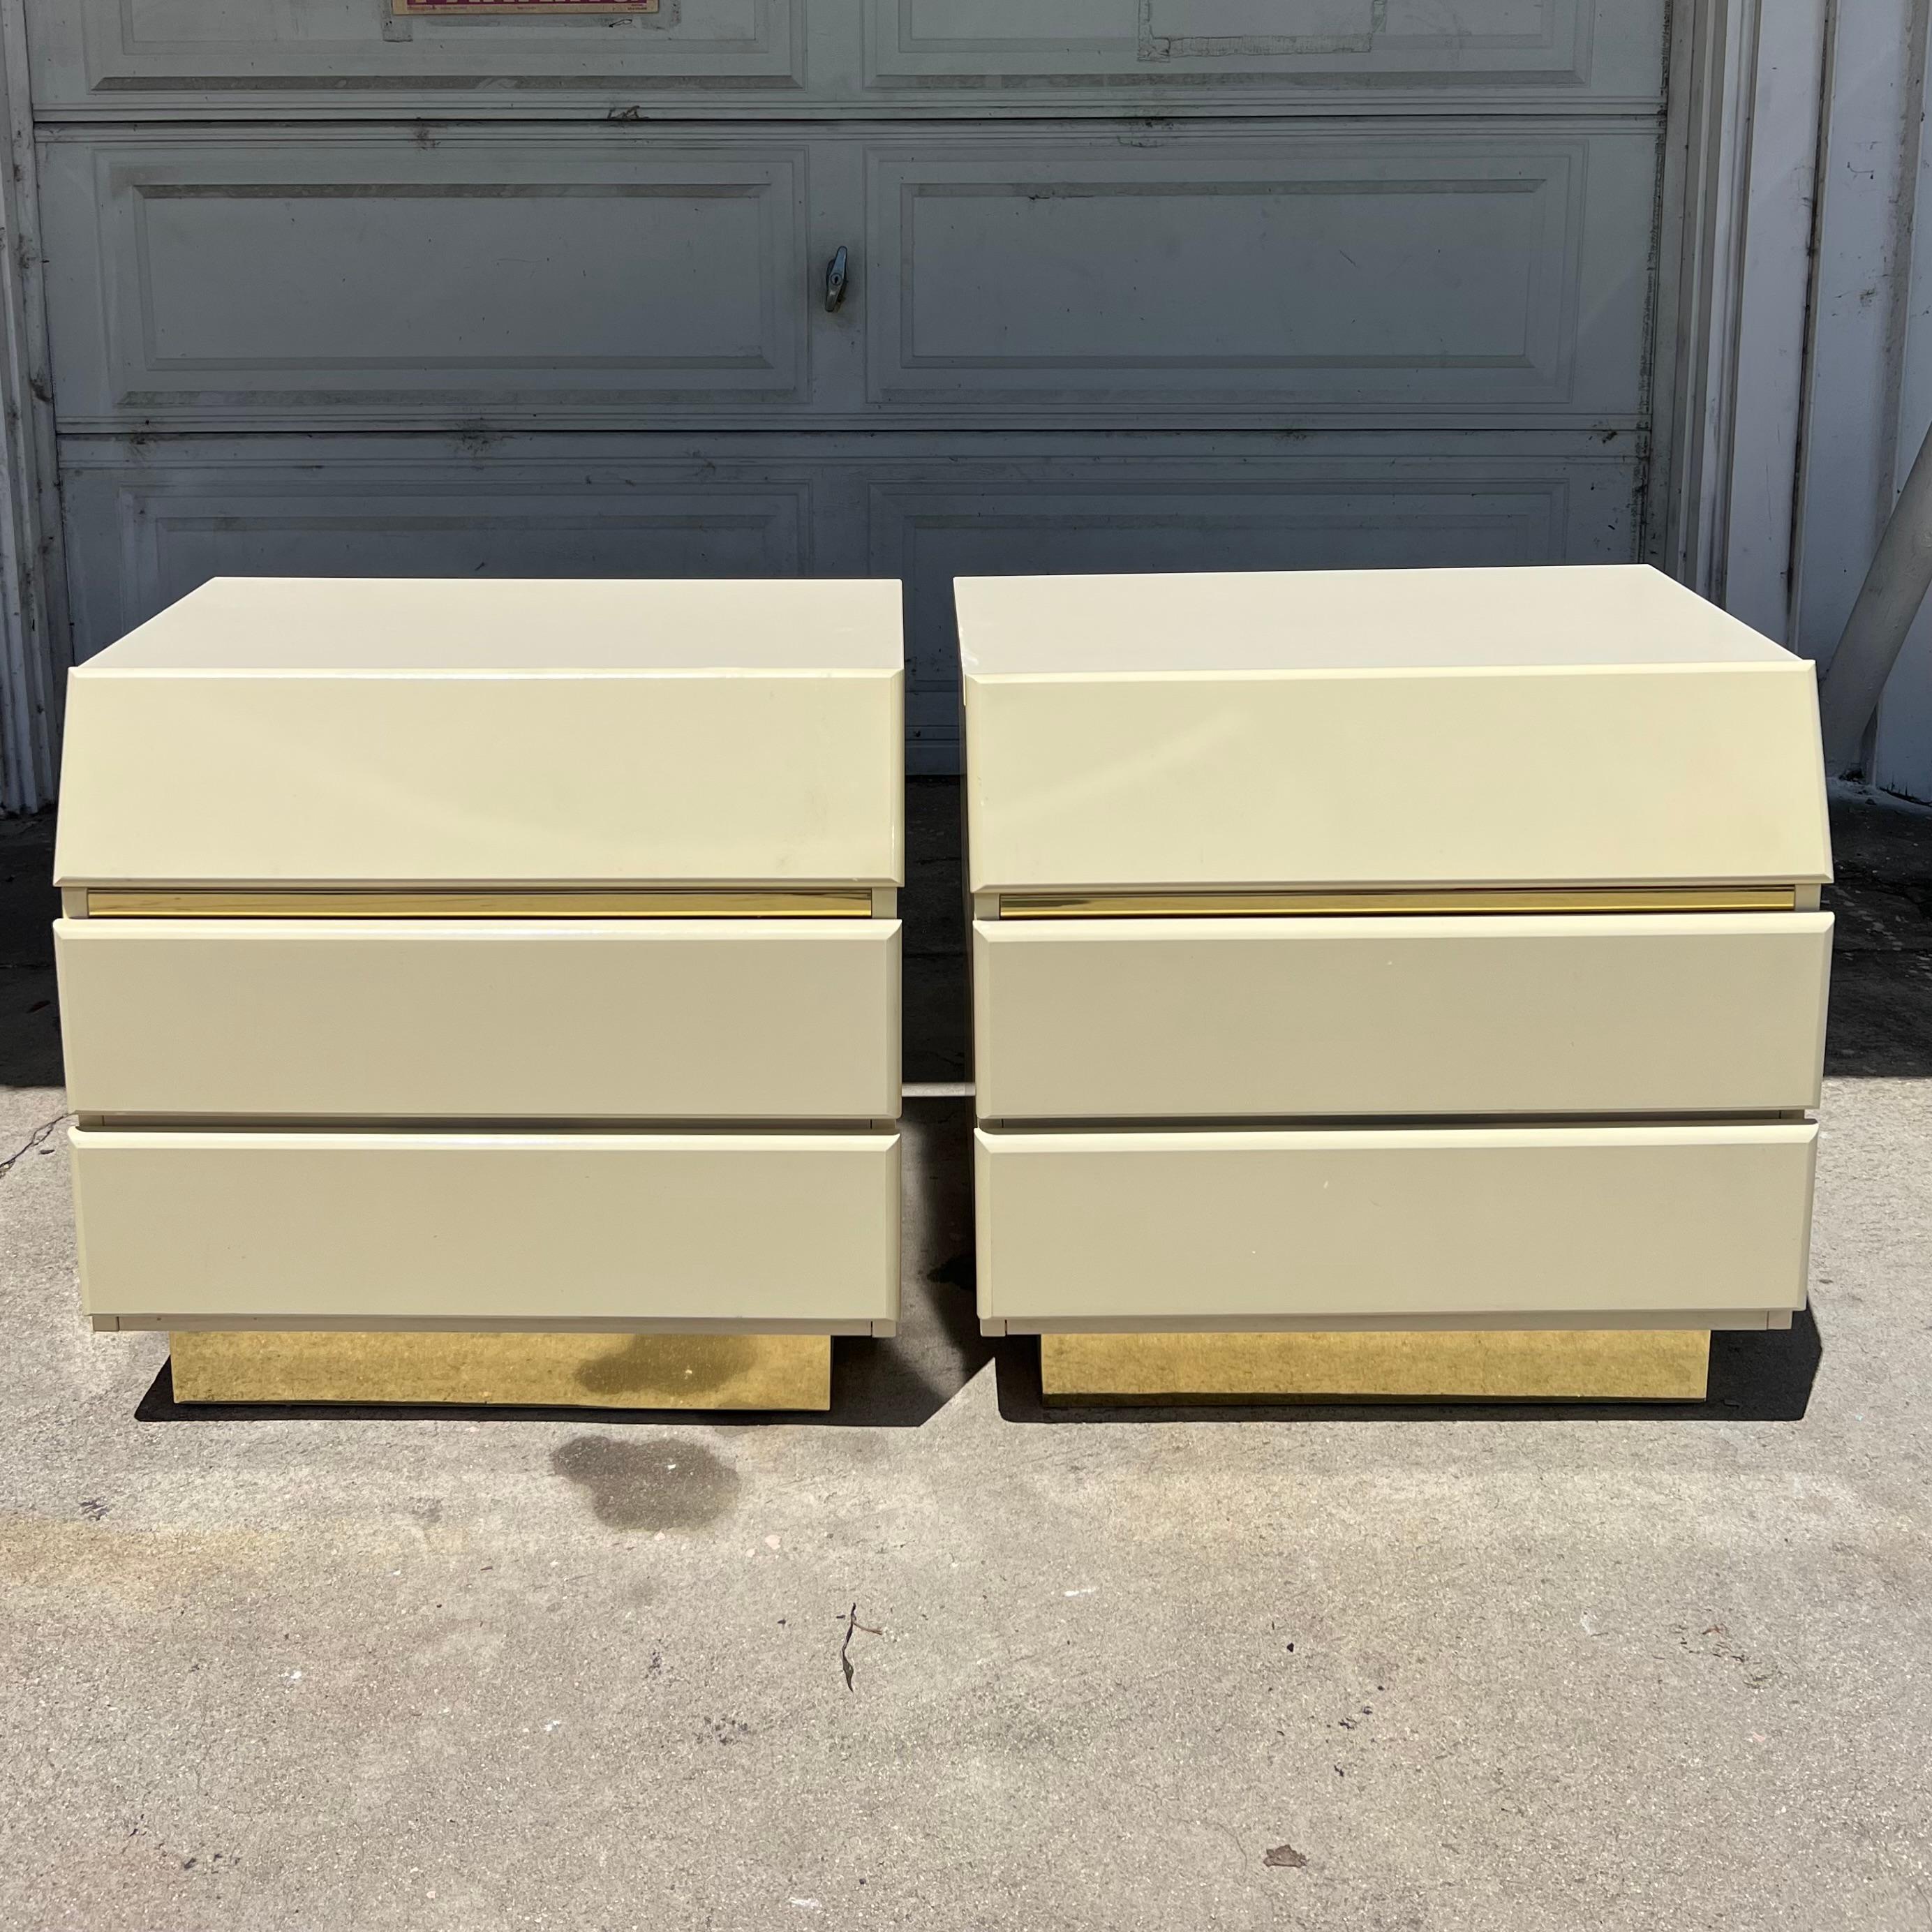 The manufacturer stamp on the back calls this color almond so I will do the same! Presenting this sleek pair of almond lacquered nightstands (matching semi circle full/queen headboard and dresser in separate listings ) with gold brass  accents. A